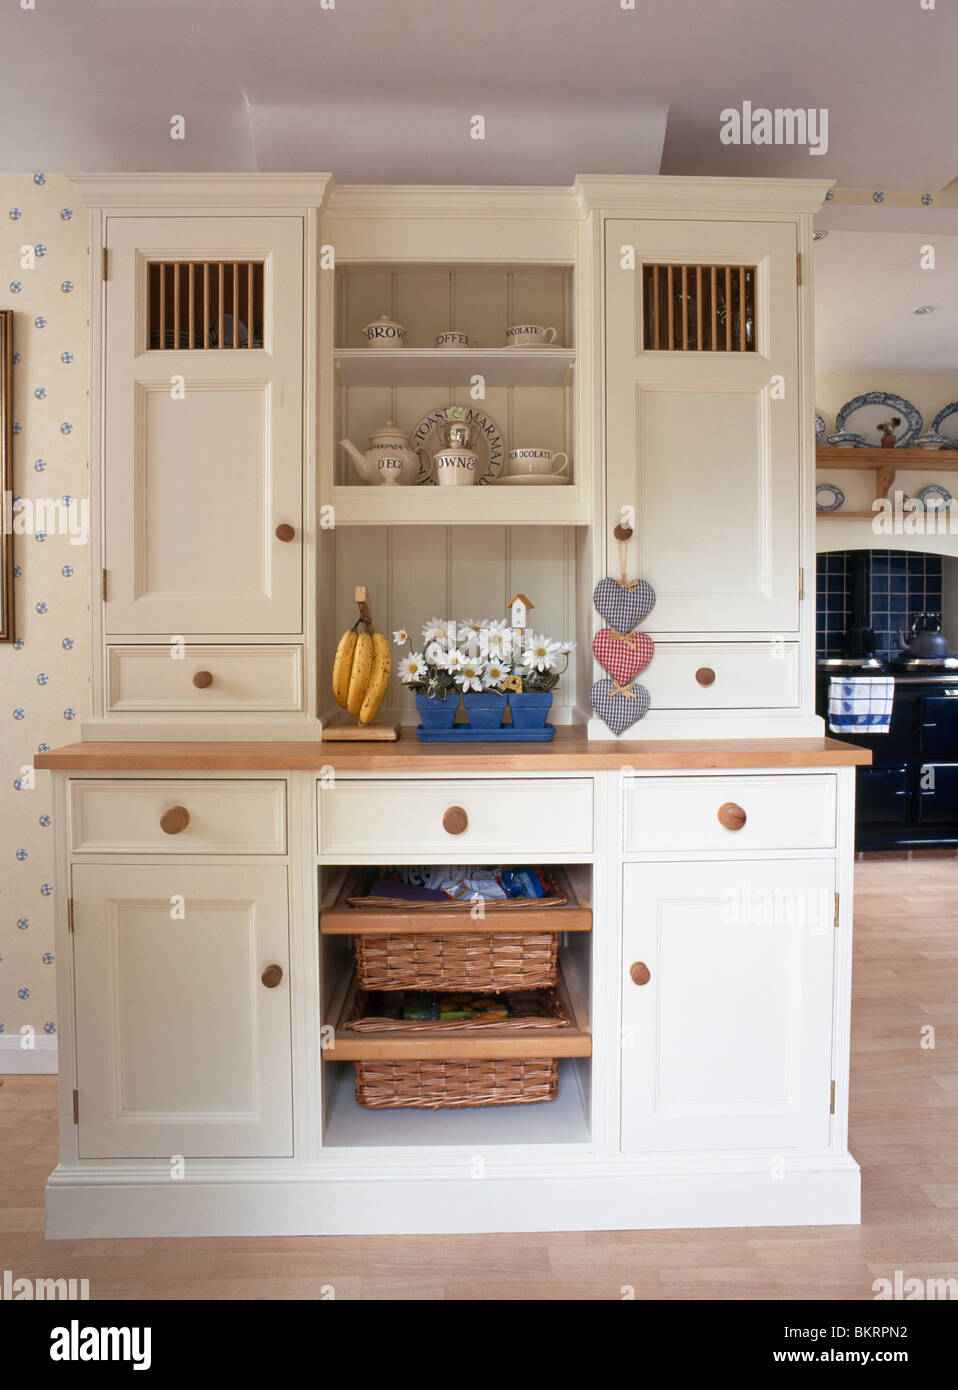 Cream fitted kitchen dresser with integral storage baskets in country  kitchen Stock Photo - Alamy